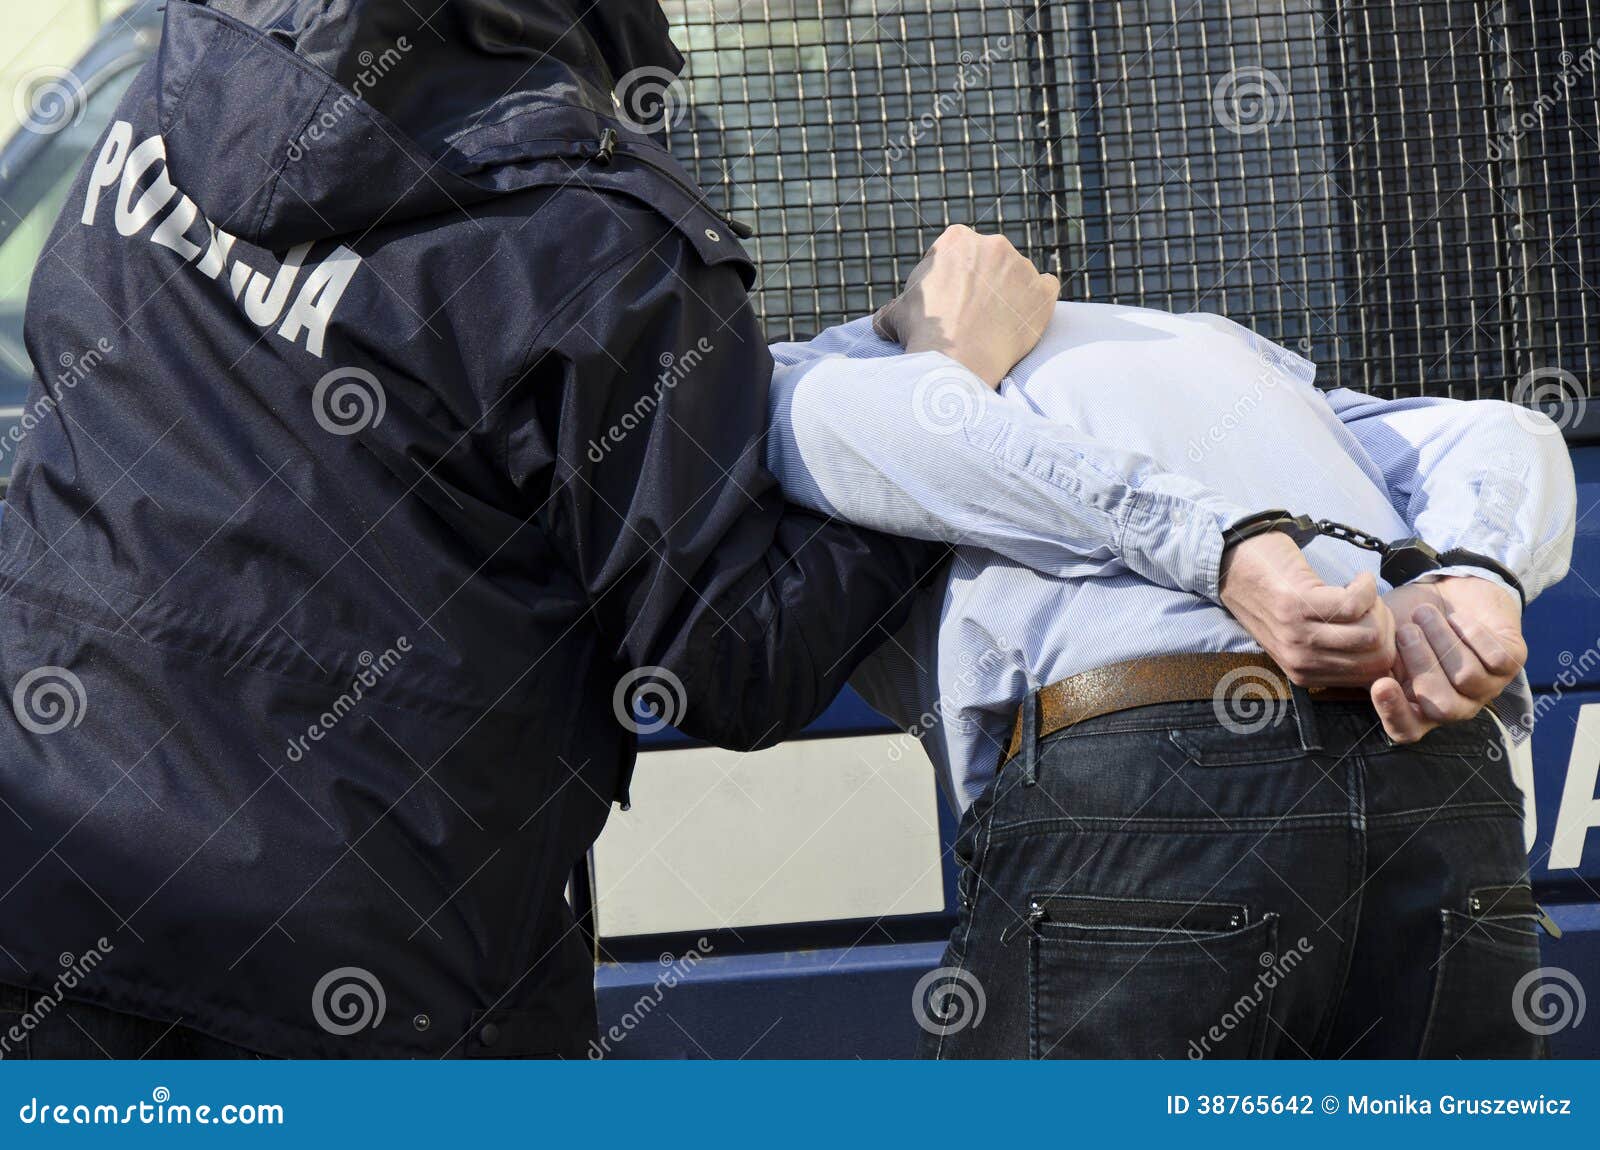 the arrest of a man